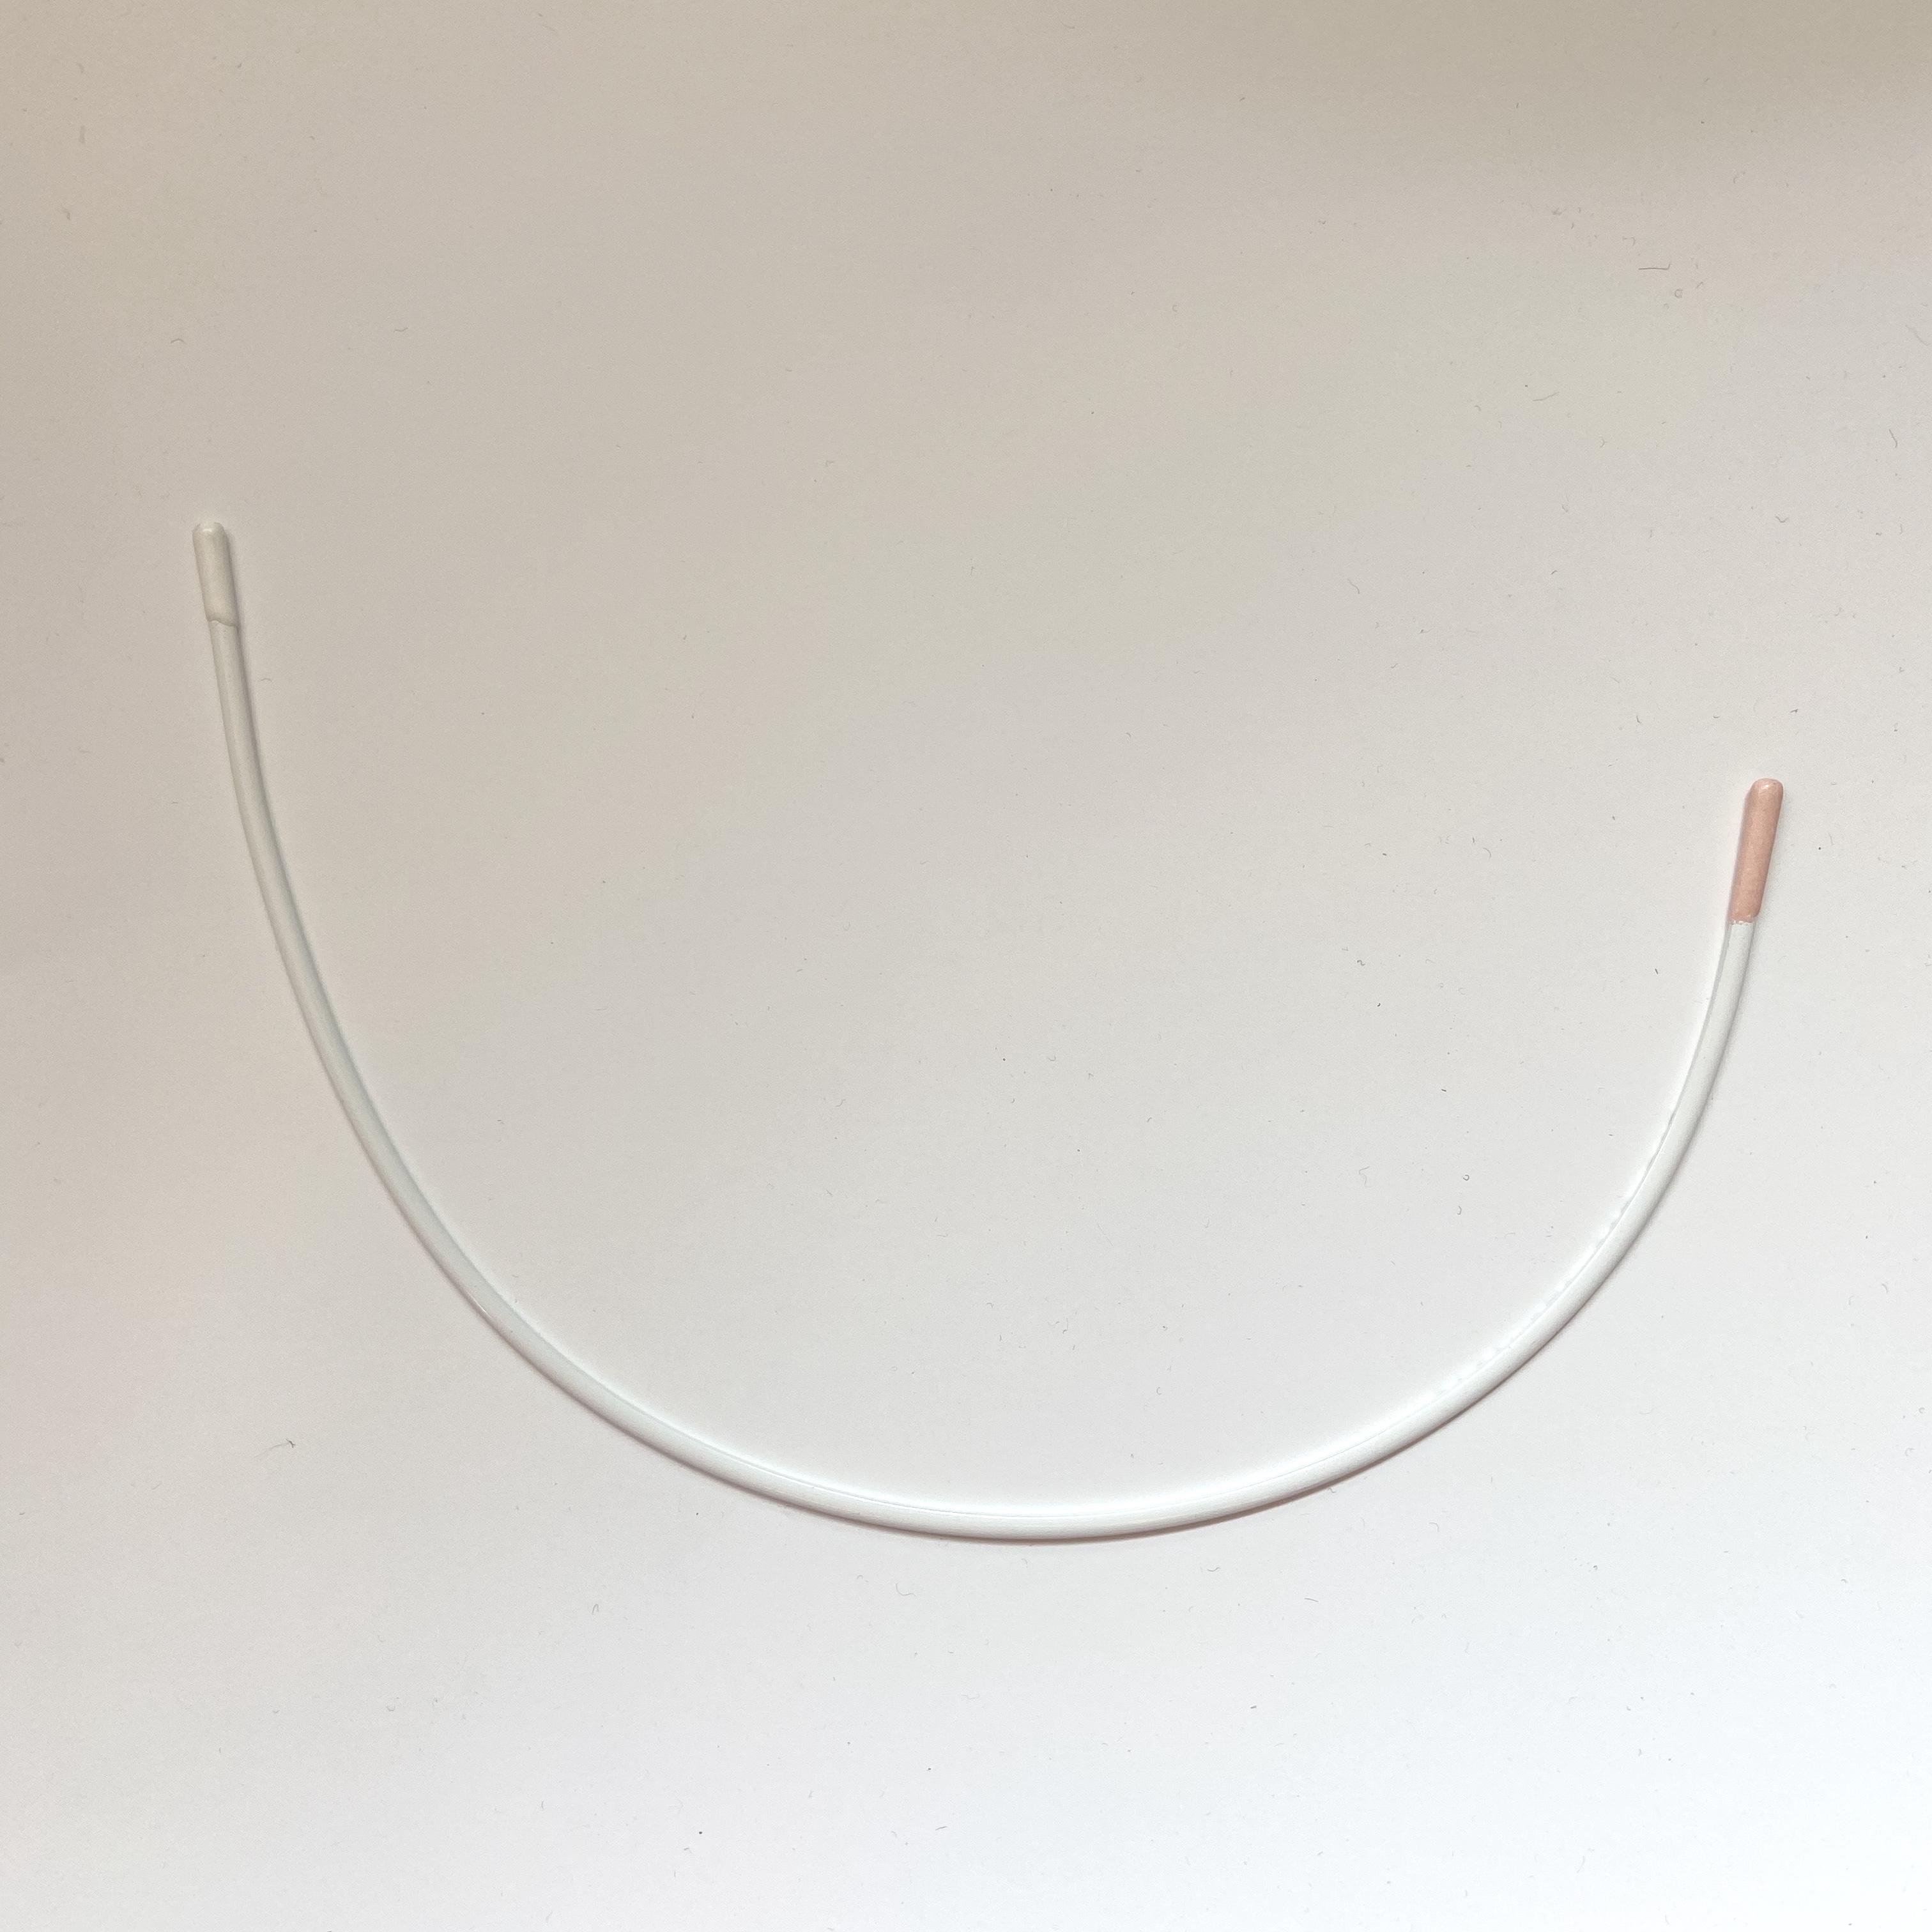 stainless steel bra wire, stainless steel bra wire Suppliers and